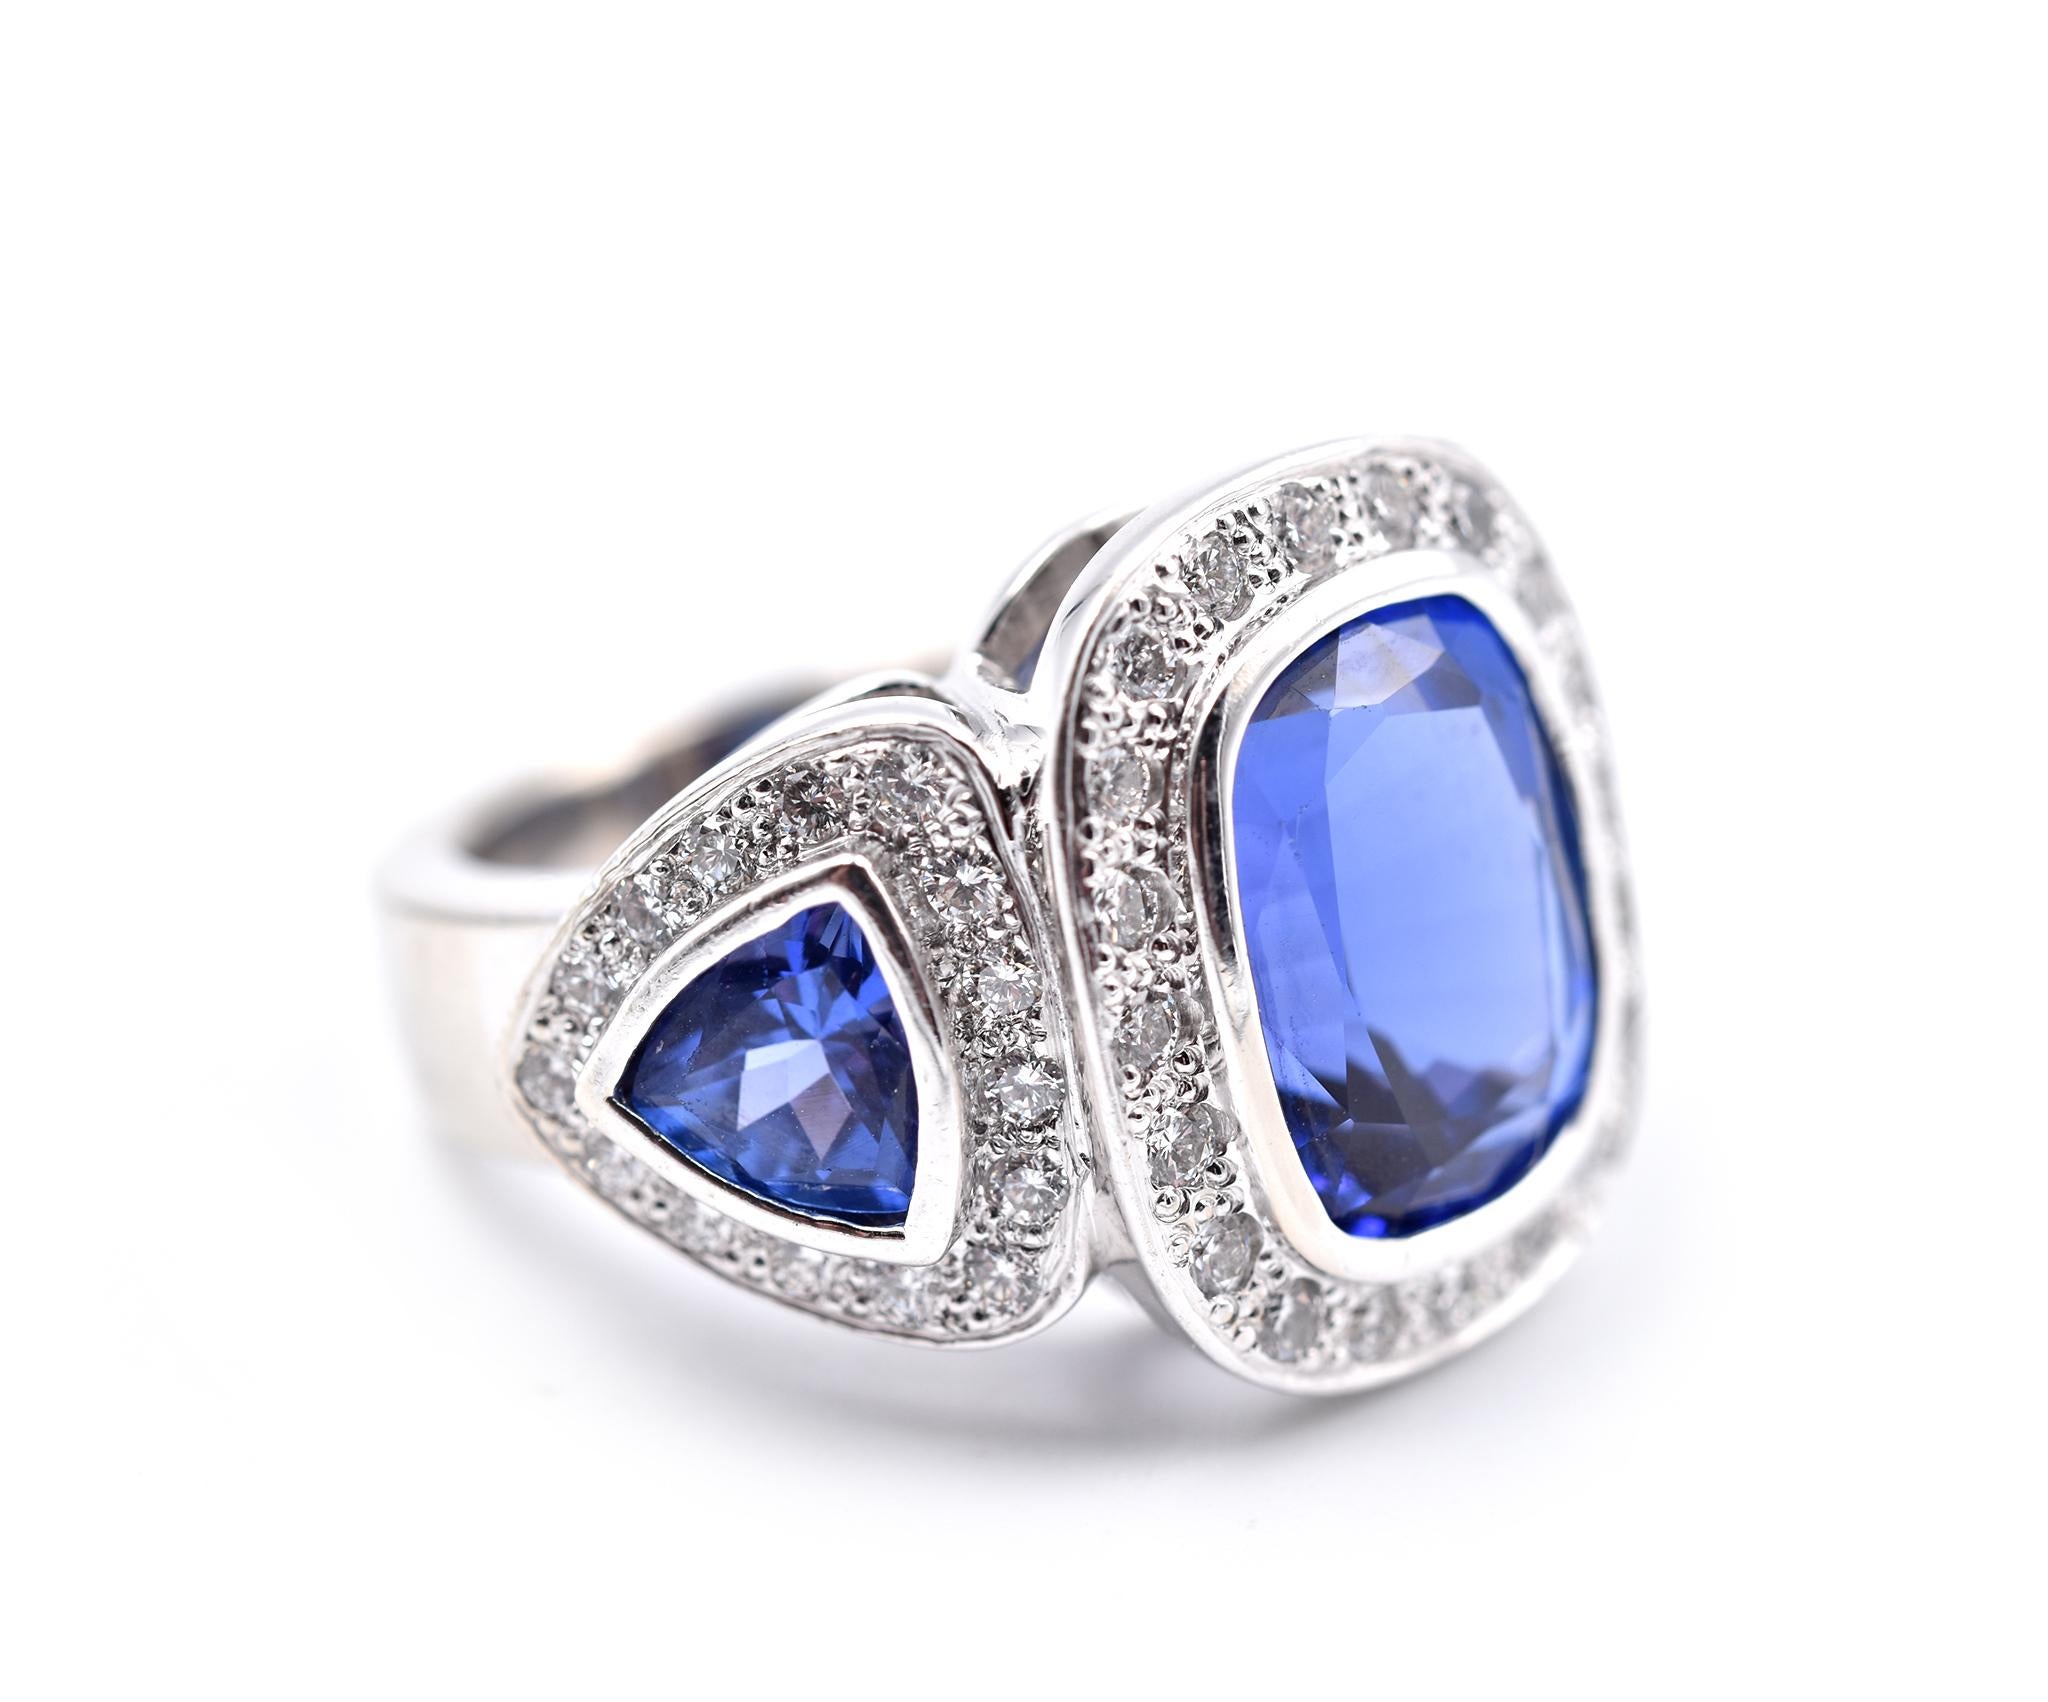 Designer: custom design
Material: 18k white gold
Tanzanite: 3 Tanzanite = 7.70cttw
Diamonds: 50 round brilliant cut = 1.50cttw
Color: G
Clarity: VS
Ring size: 6 (please allow two additional shipping days for sizing requests) 
Dimensions: Ring top is